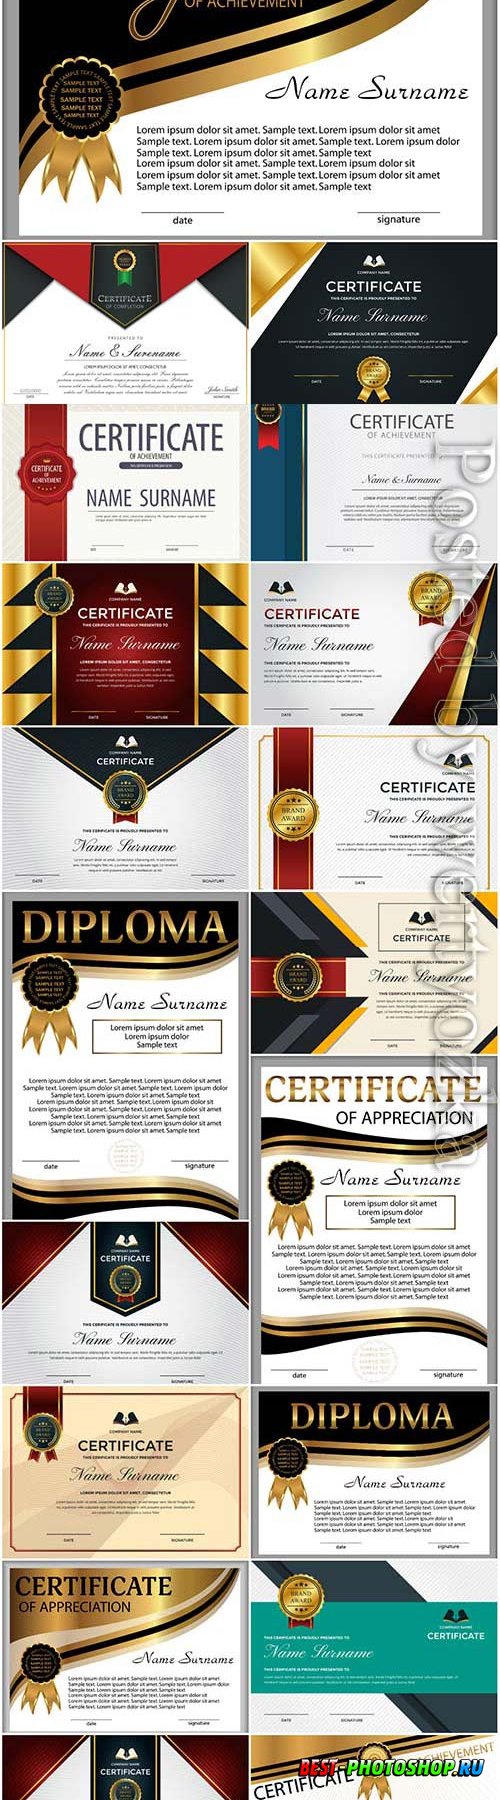 Diplomas and certificates in vector